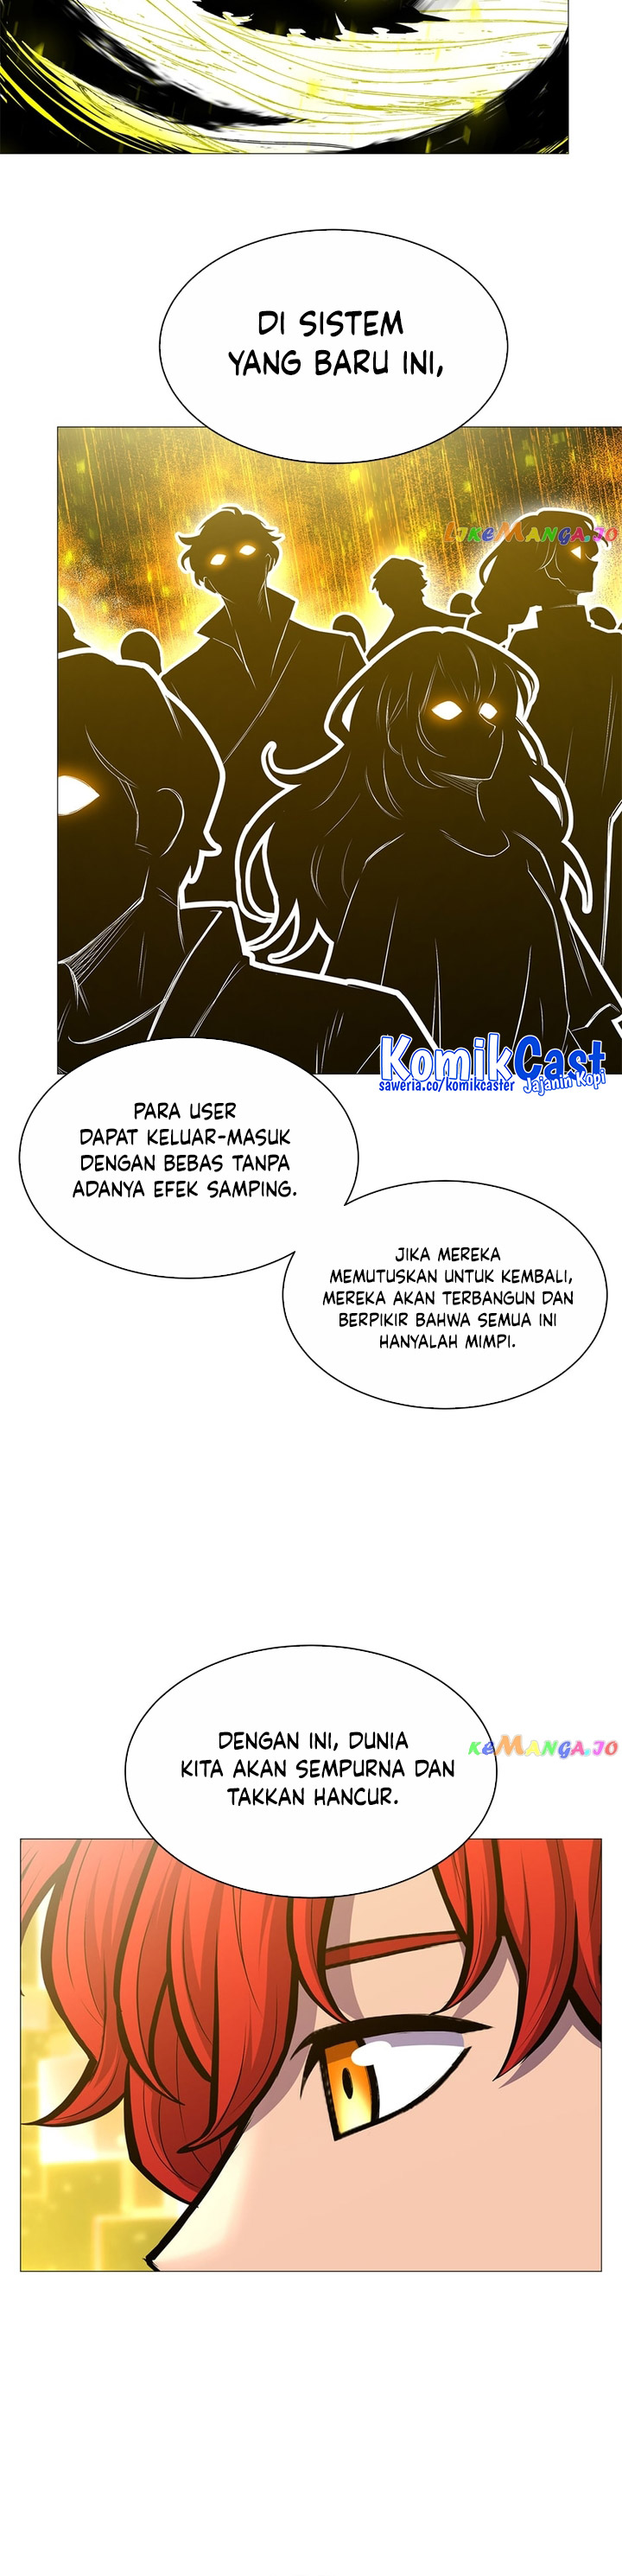 Updater Chapter 136 End - 437